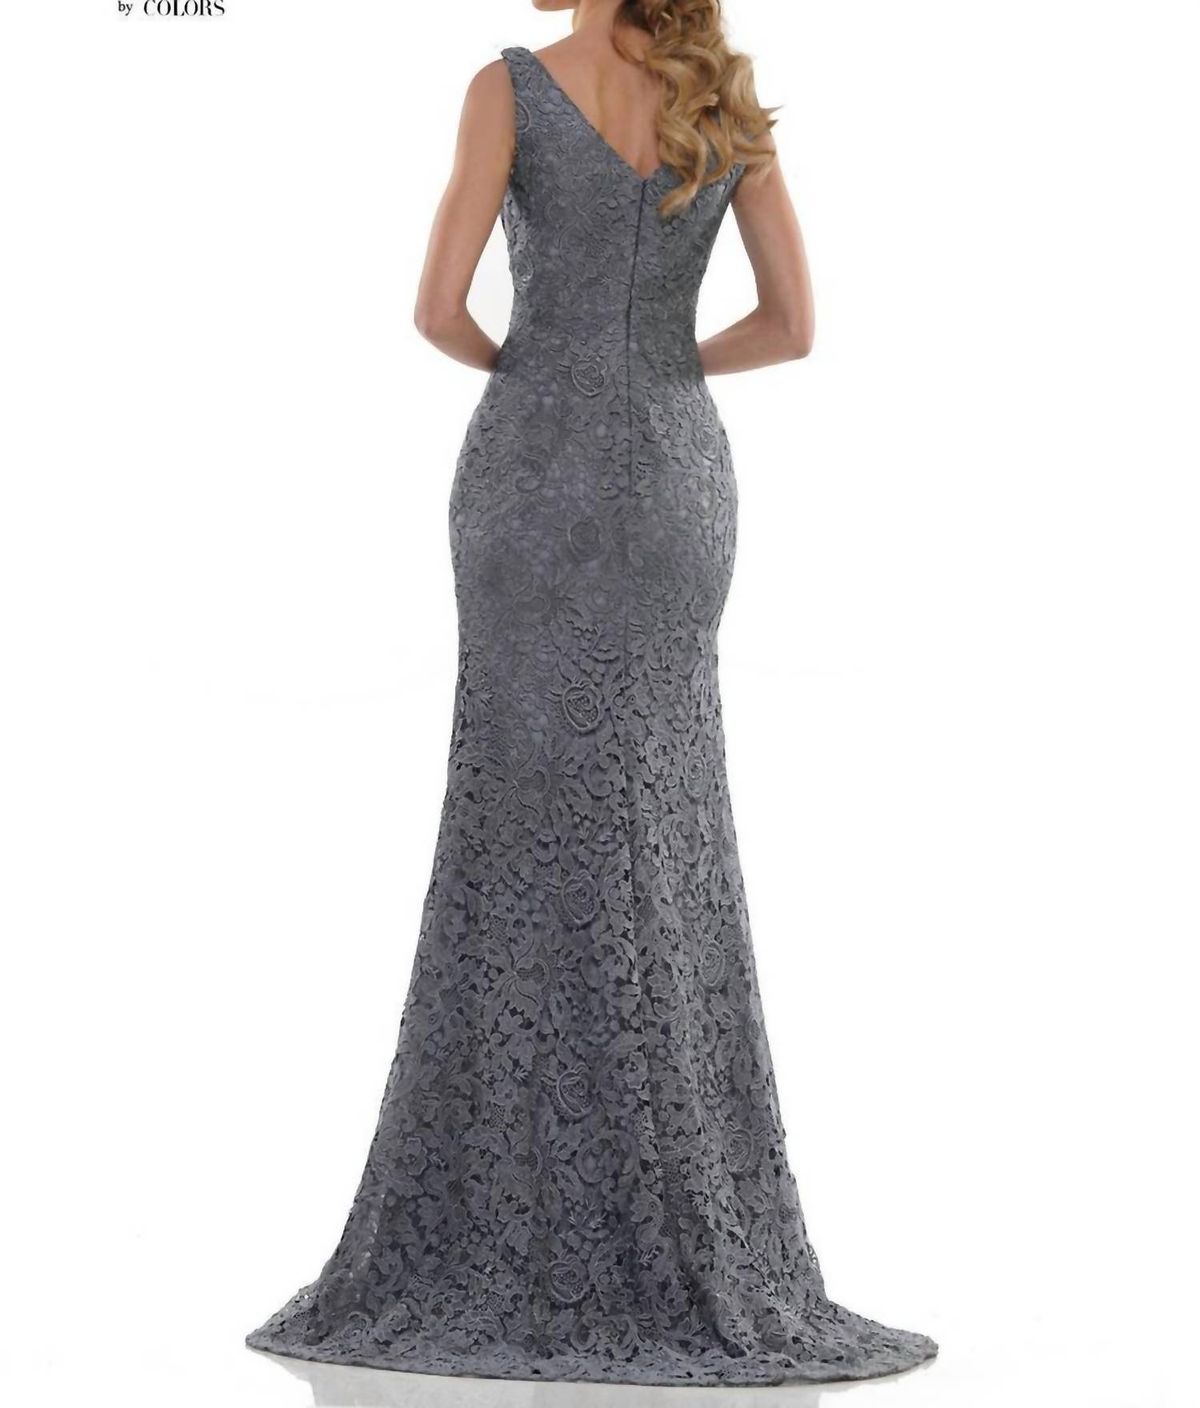 Style 1-560388834-98 Marsoni by Colors Size 10 Lace Grey A-line Dress on Queenly